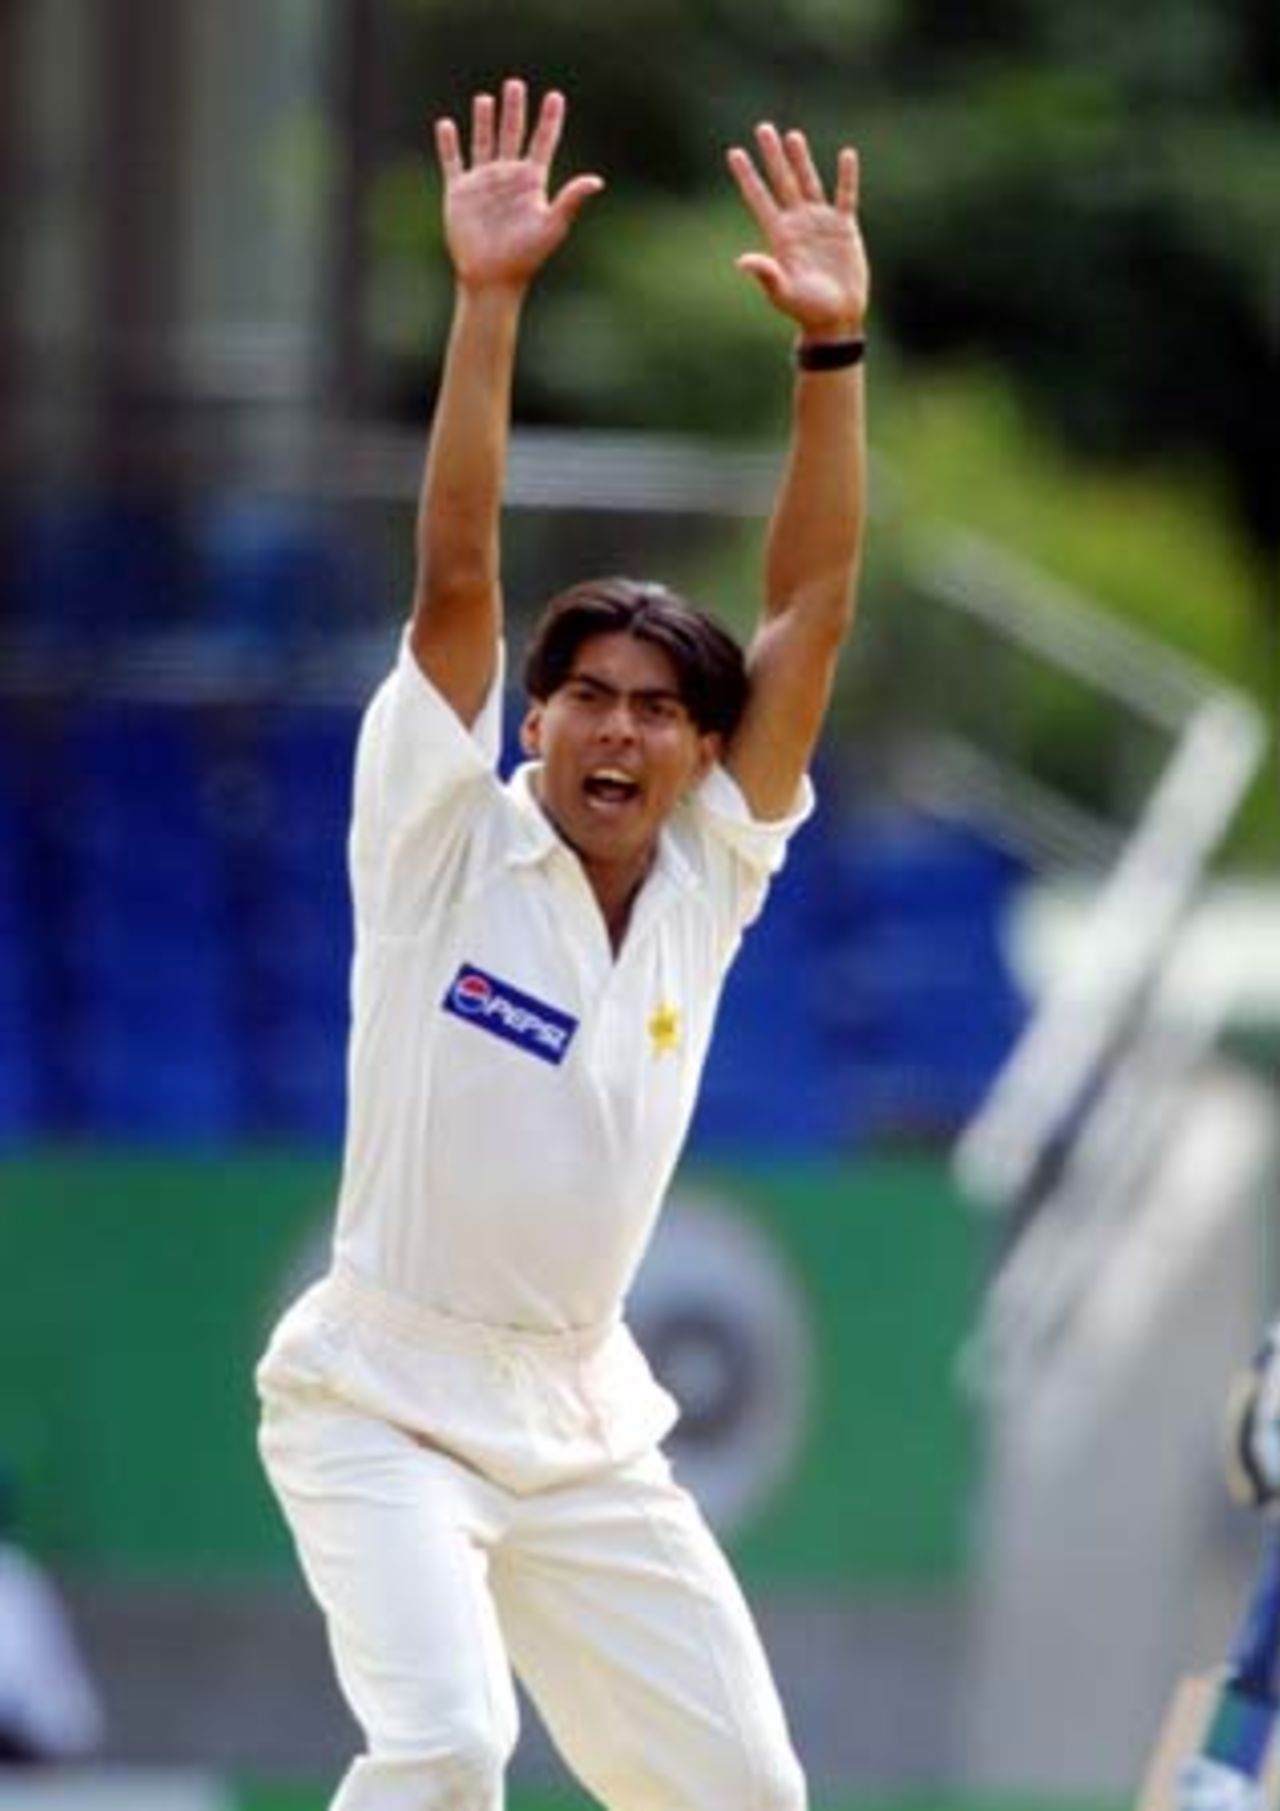 Debutant Pakistan fast bowler Mohammed Sami unsuccessfully appeals for a wicket. 1st Test: New Zealand v Pakistan at Eden Park, Auckland, 8-12 March 2001 (10 March 2001).